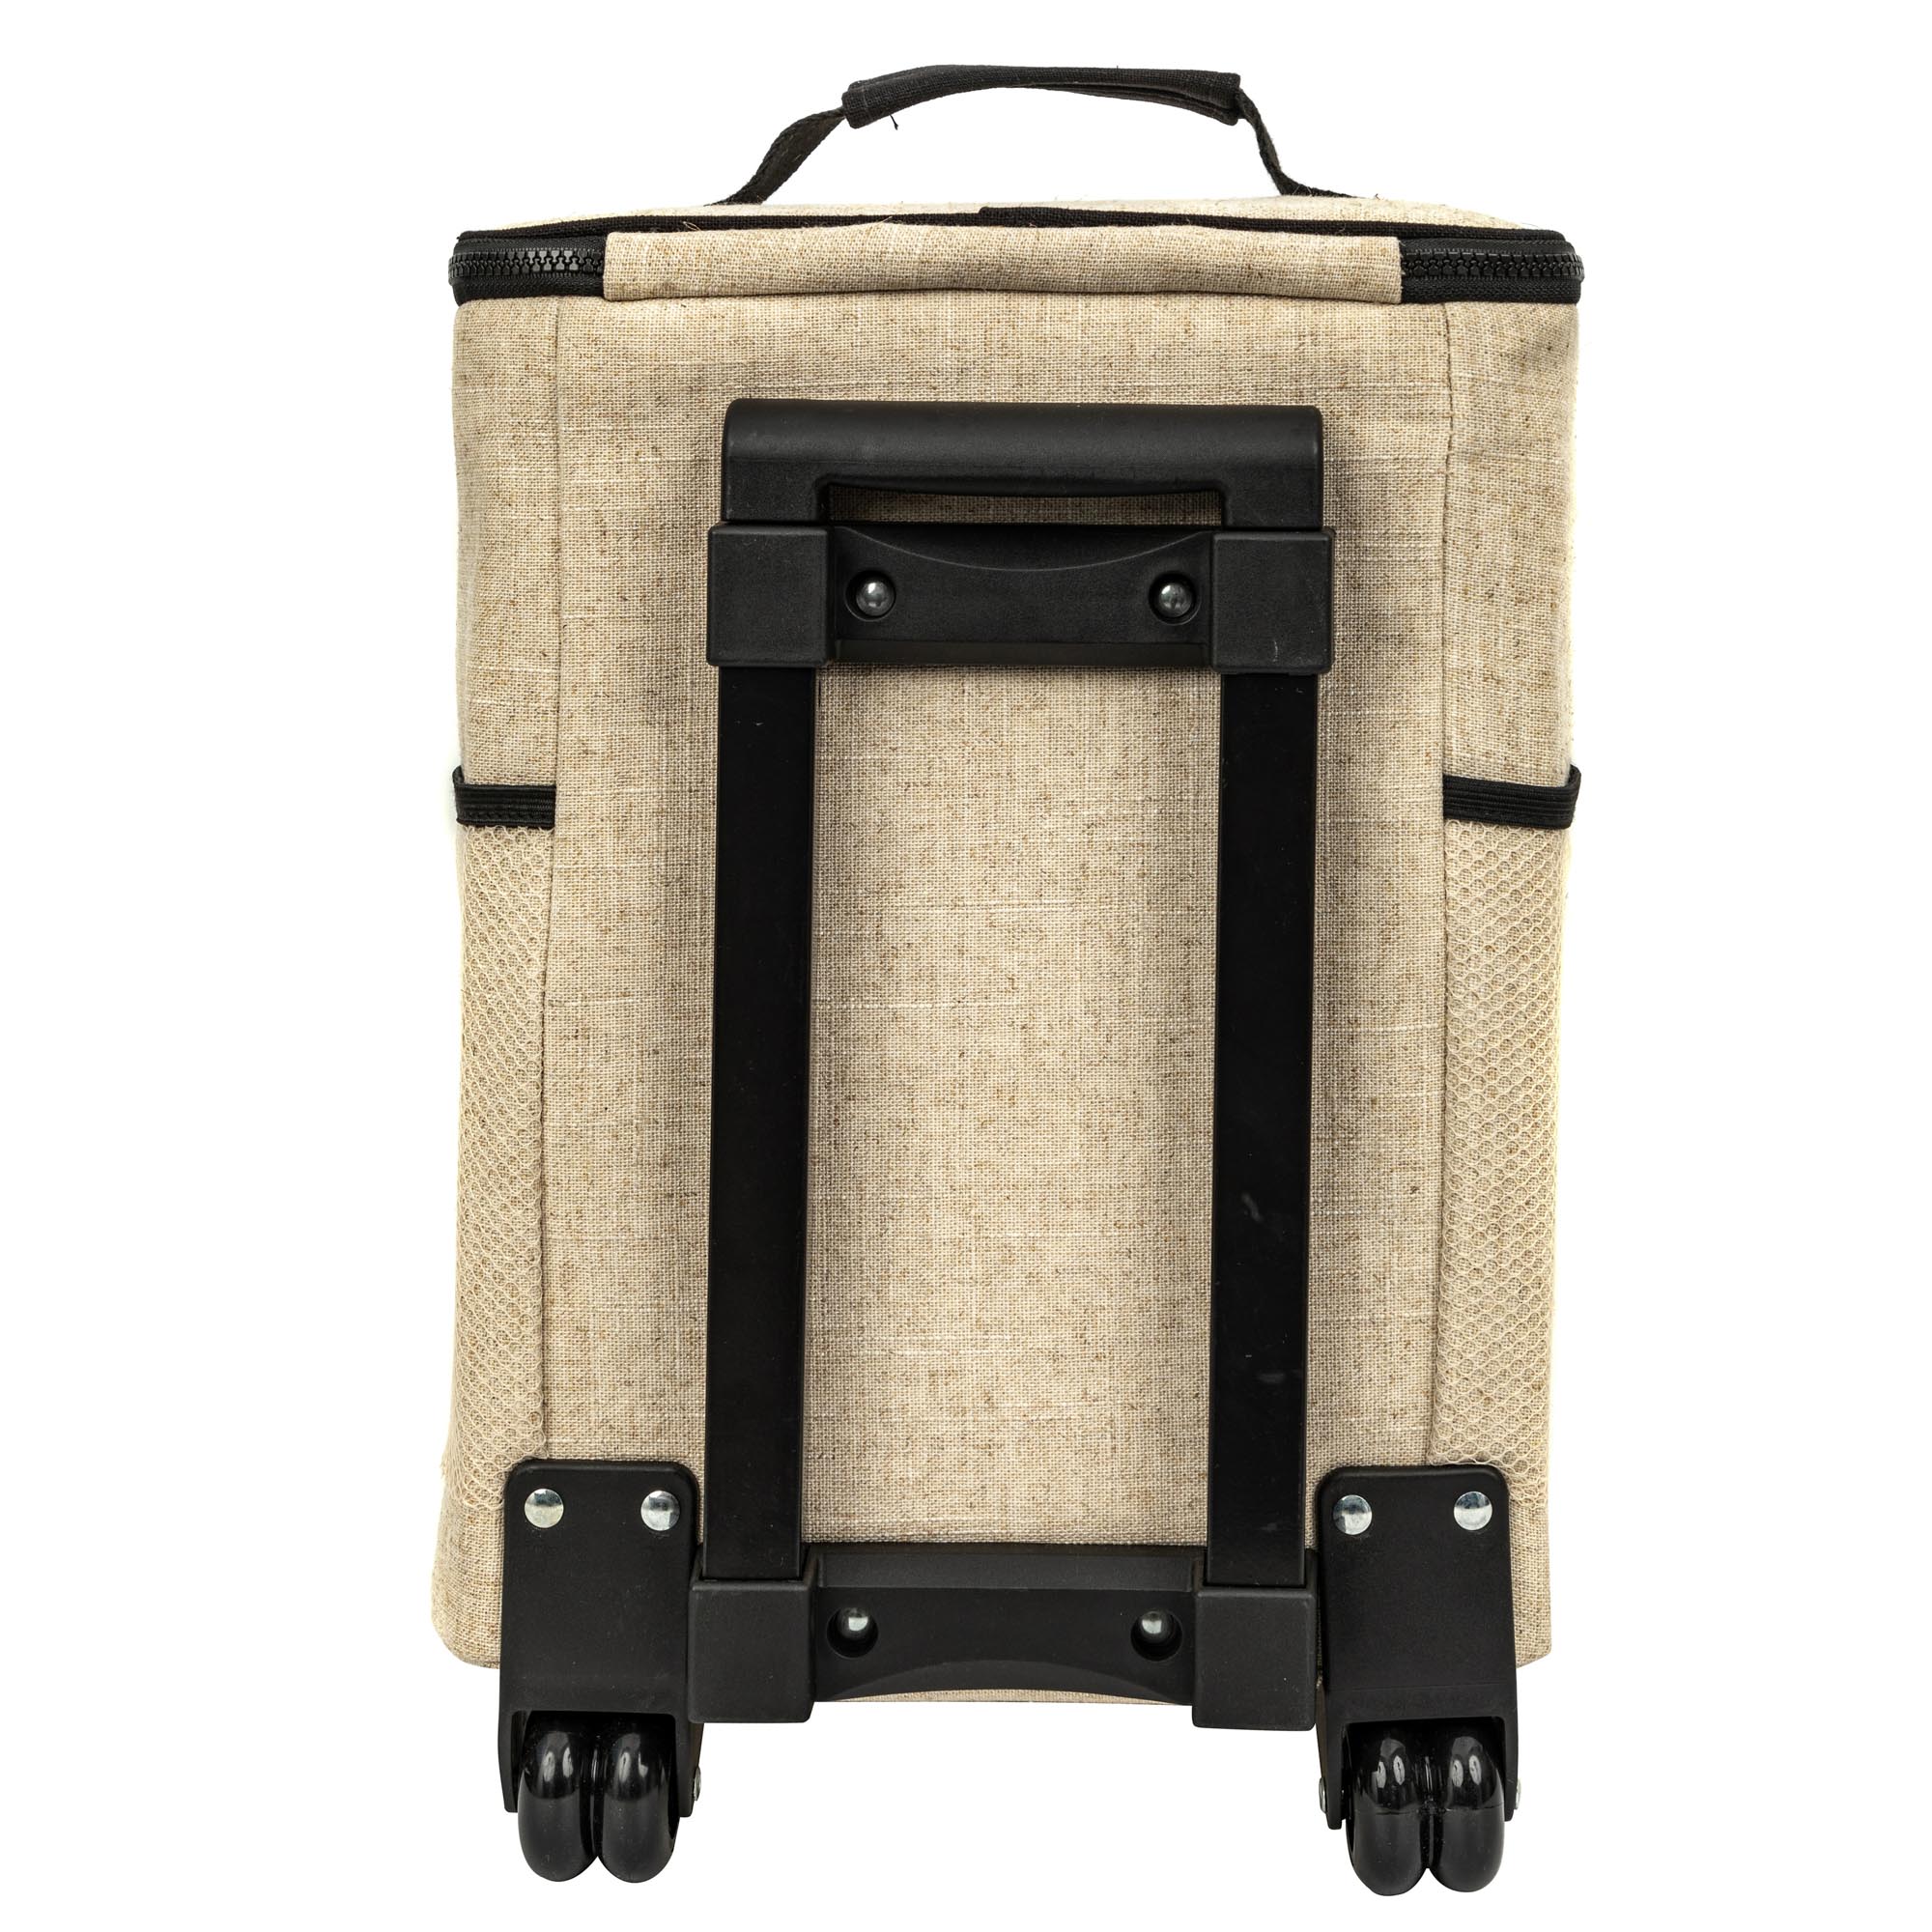 High Quality Large Capacity Canvas Lunch Cooler Trolley Bag with Wheels for Picnic